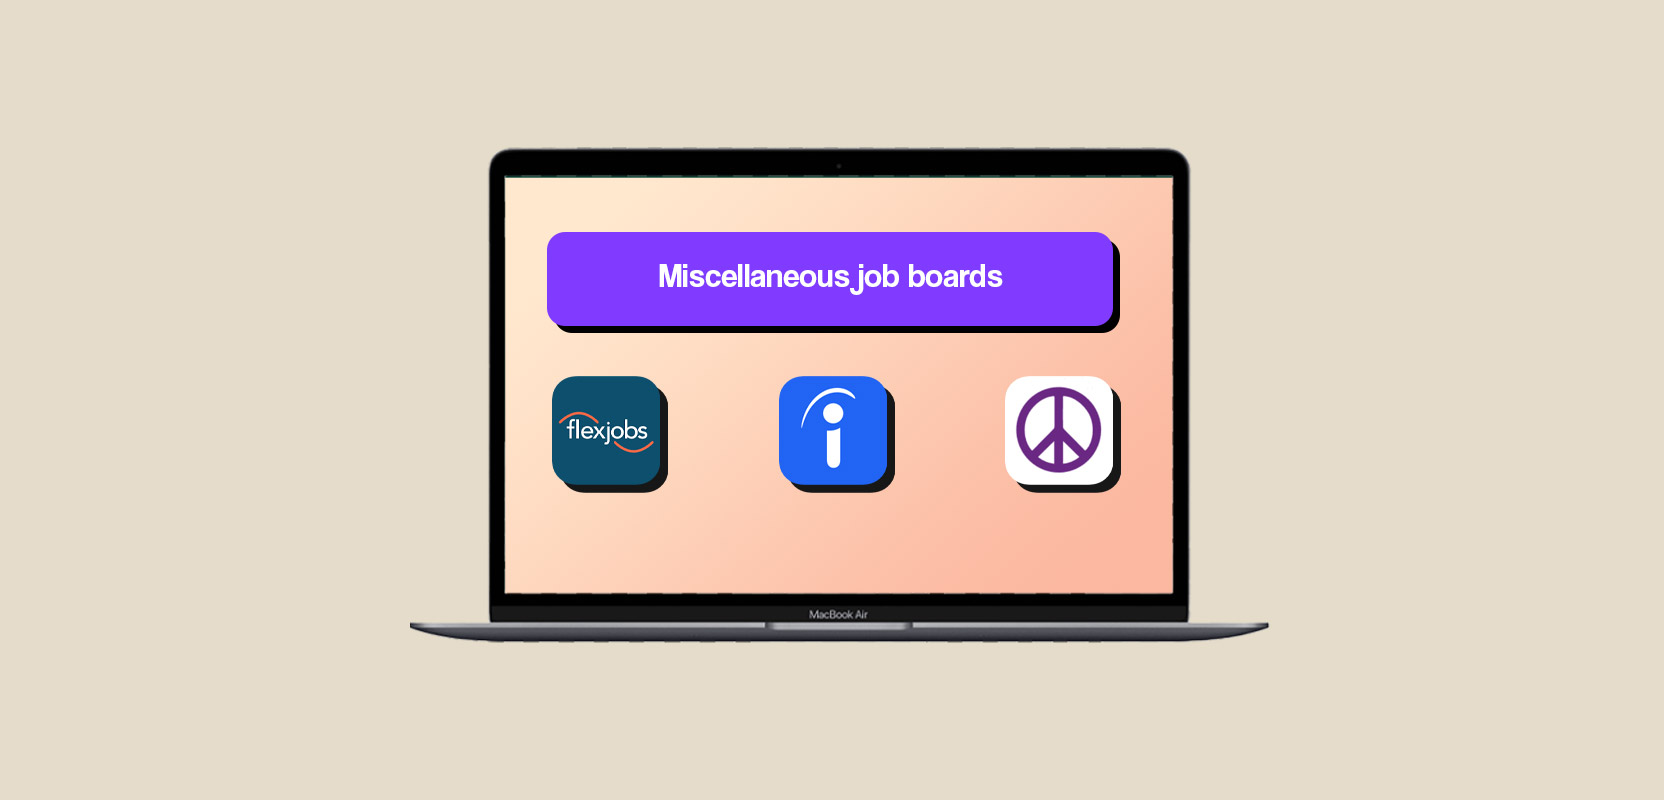 Laptop screen showing several icons of miscellaneous job boards